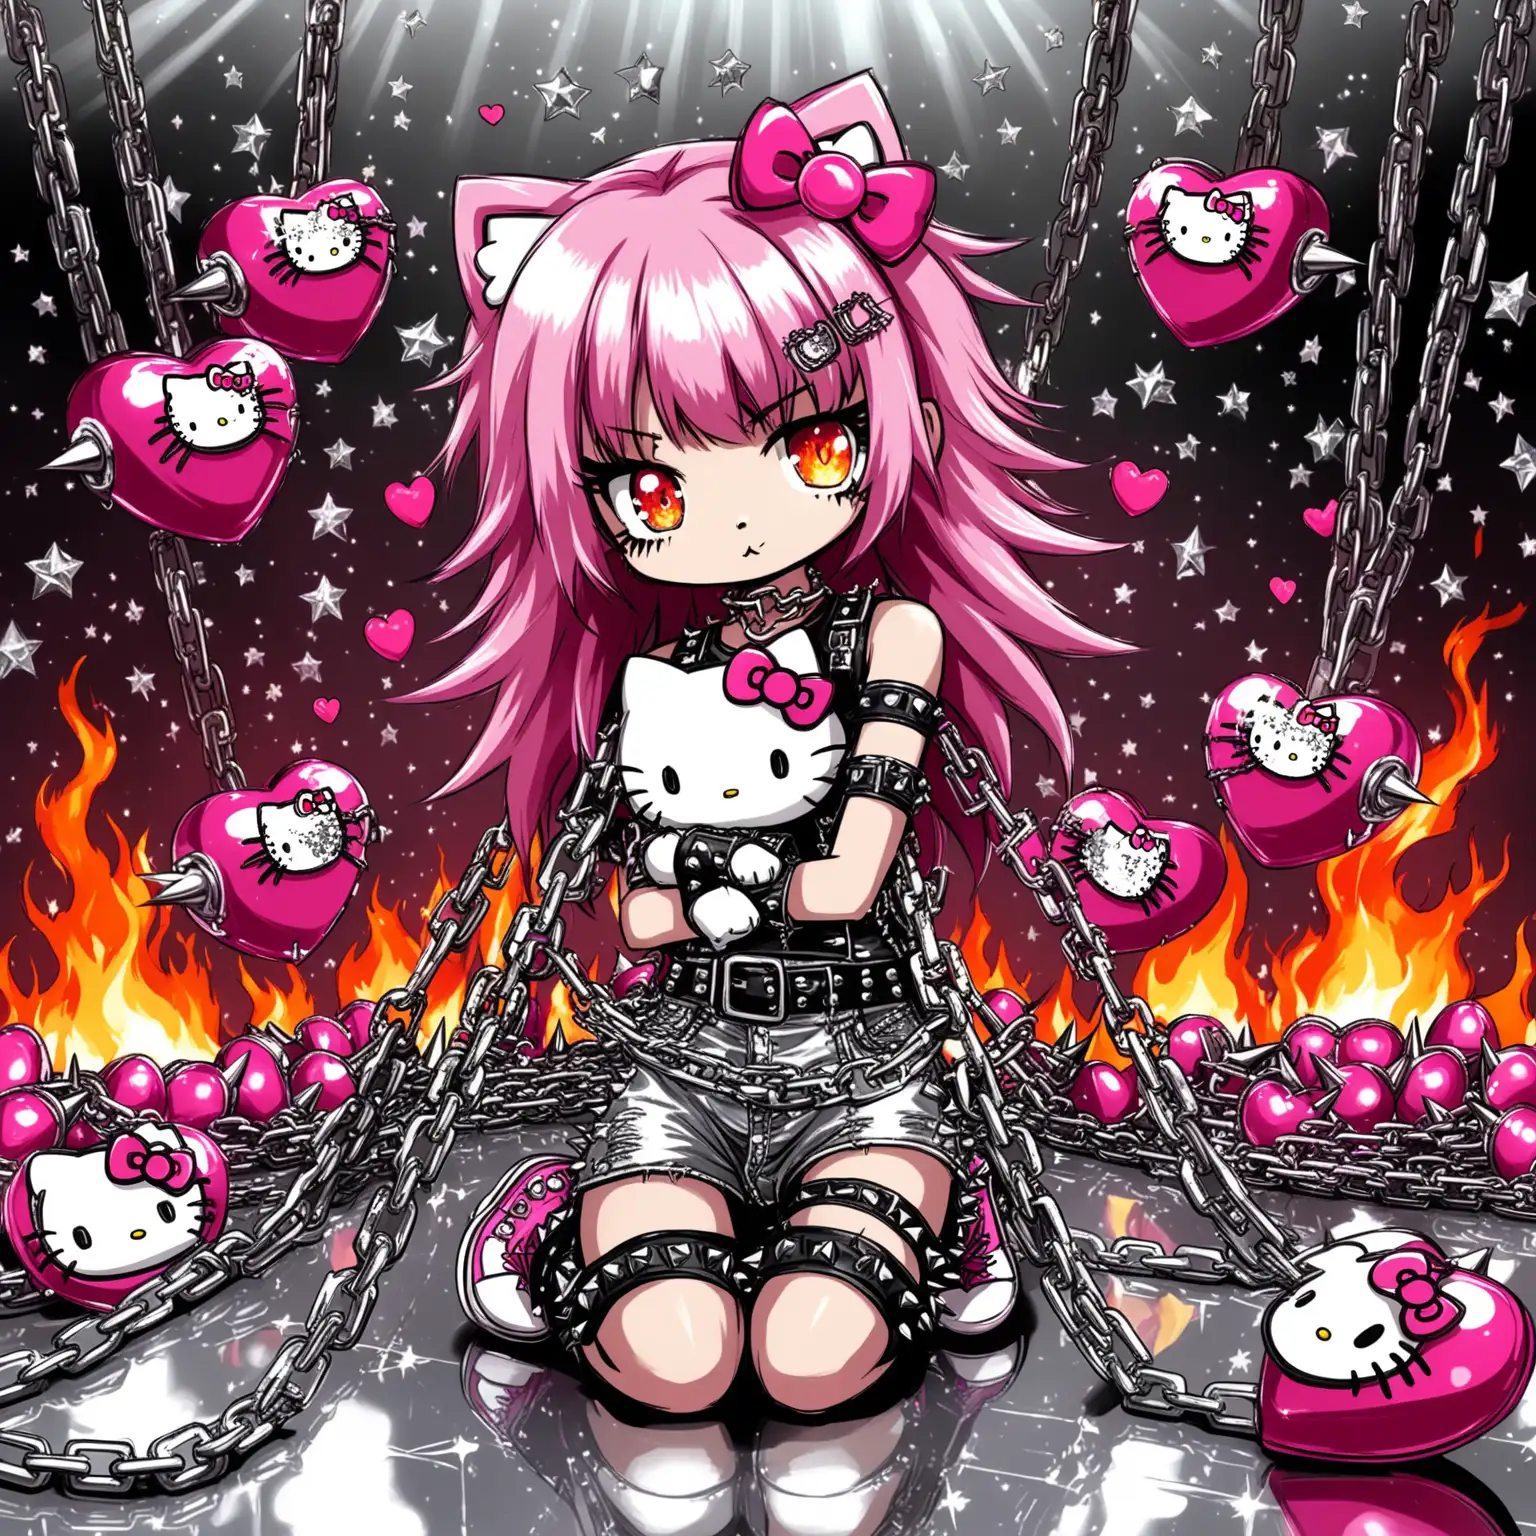 Pink Hello Kitty, looking flirtatious in chains and spikes, with diamonds on the chains, on silver reflective floor, with heart shaped bombs with spikes on fire in background, silver glitter and stars in background, badass, cute, punk rock, pretty, hello kitty